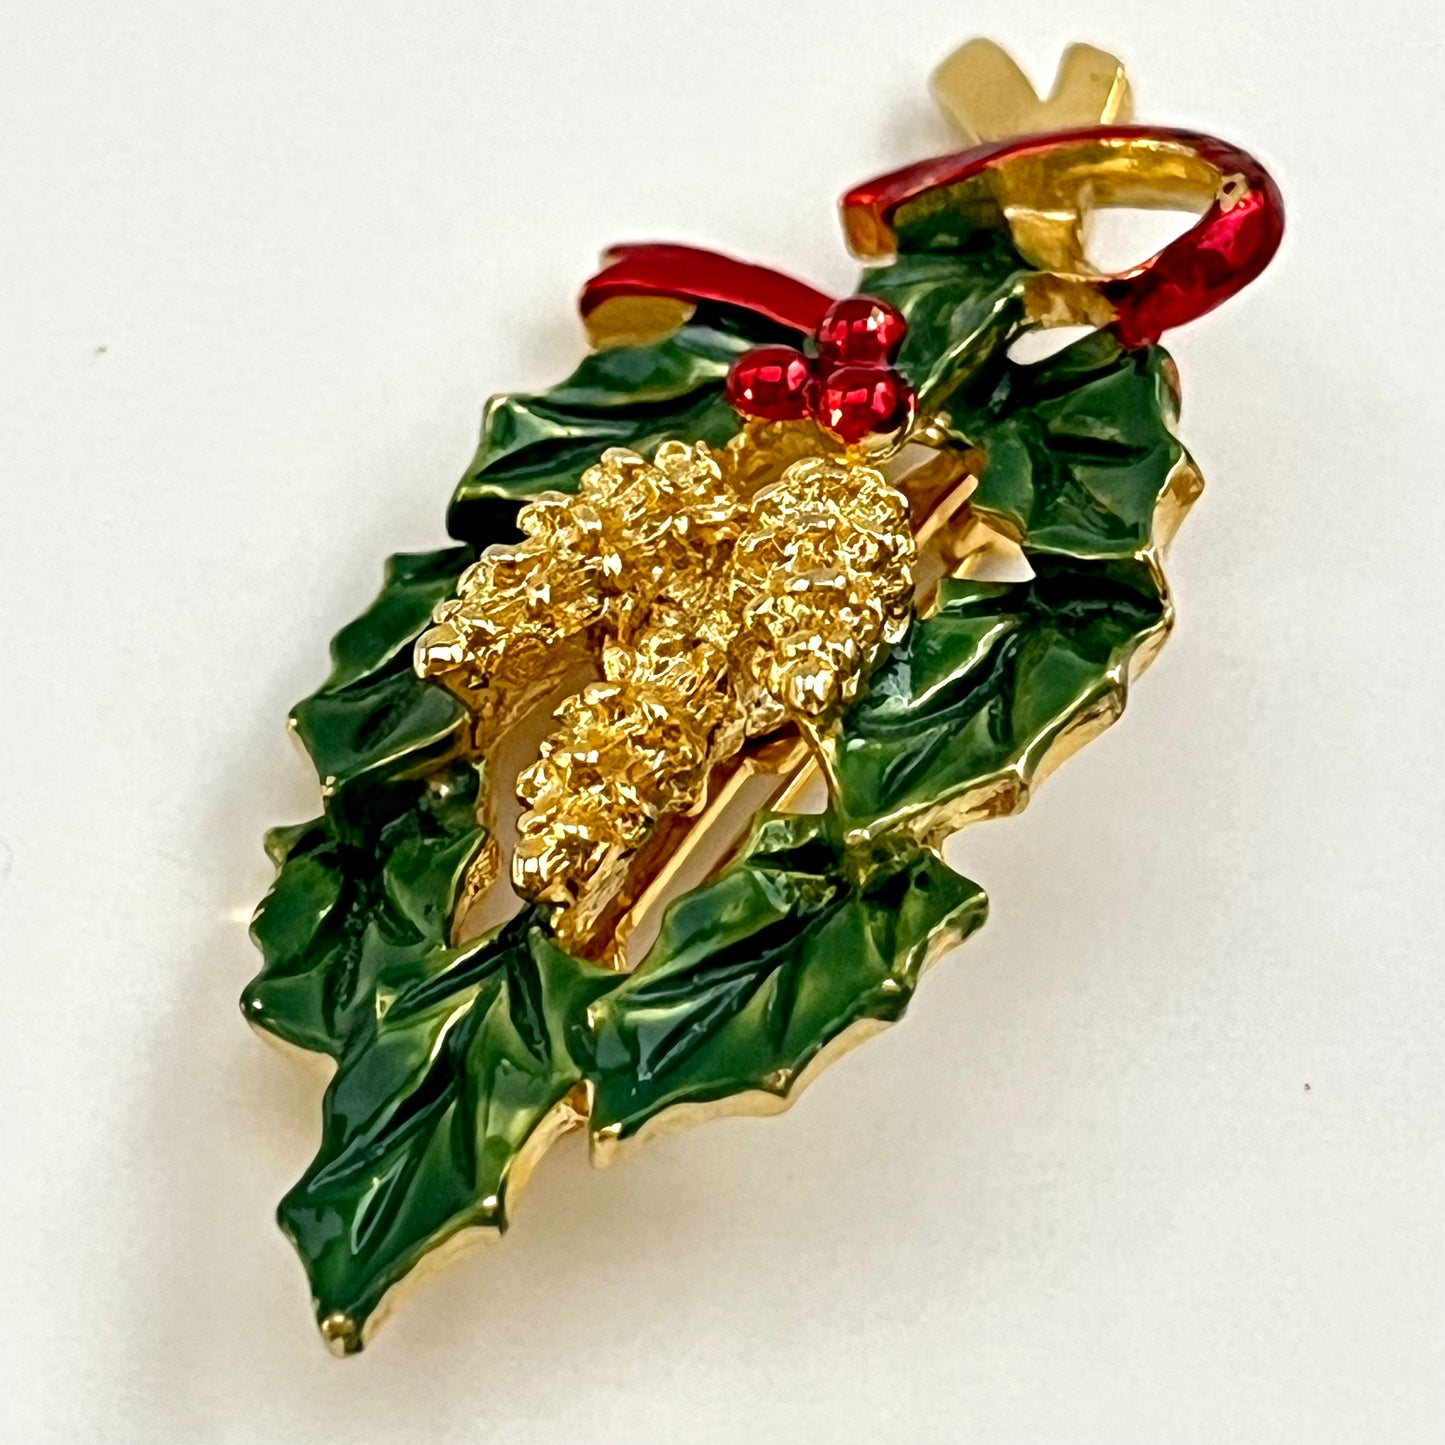 Late 60s/ Early 70s Gerry's Holly & Pinecone Brooch